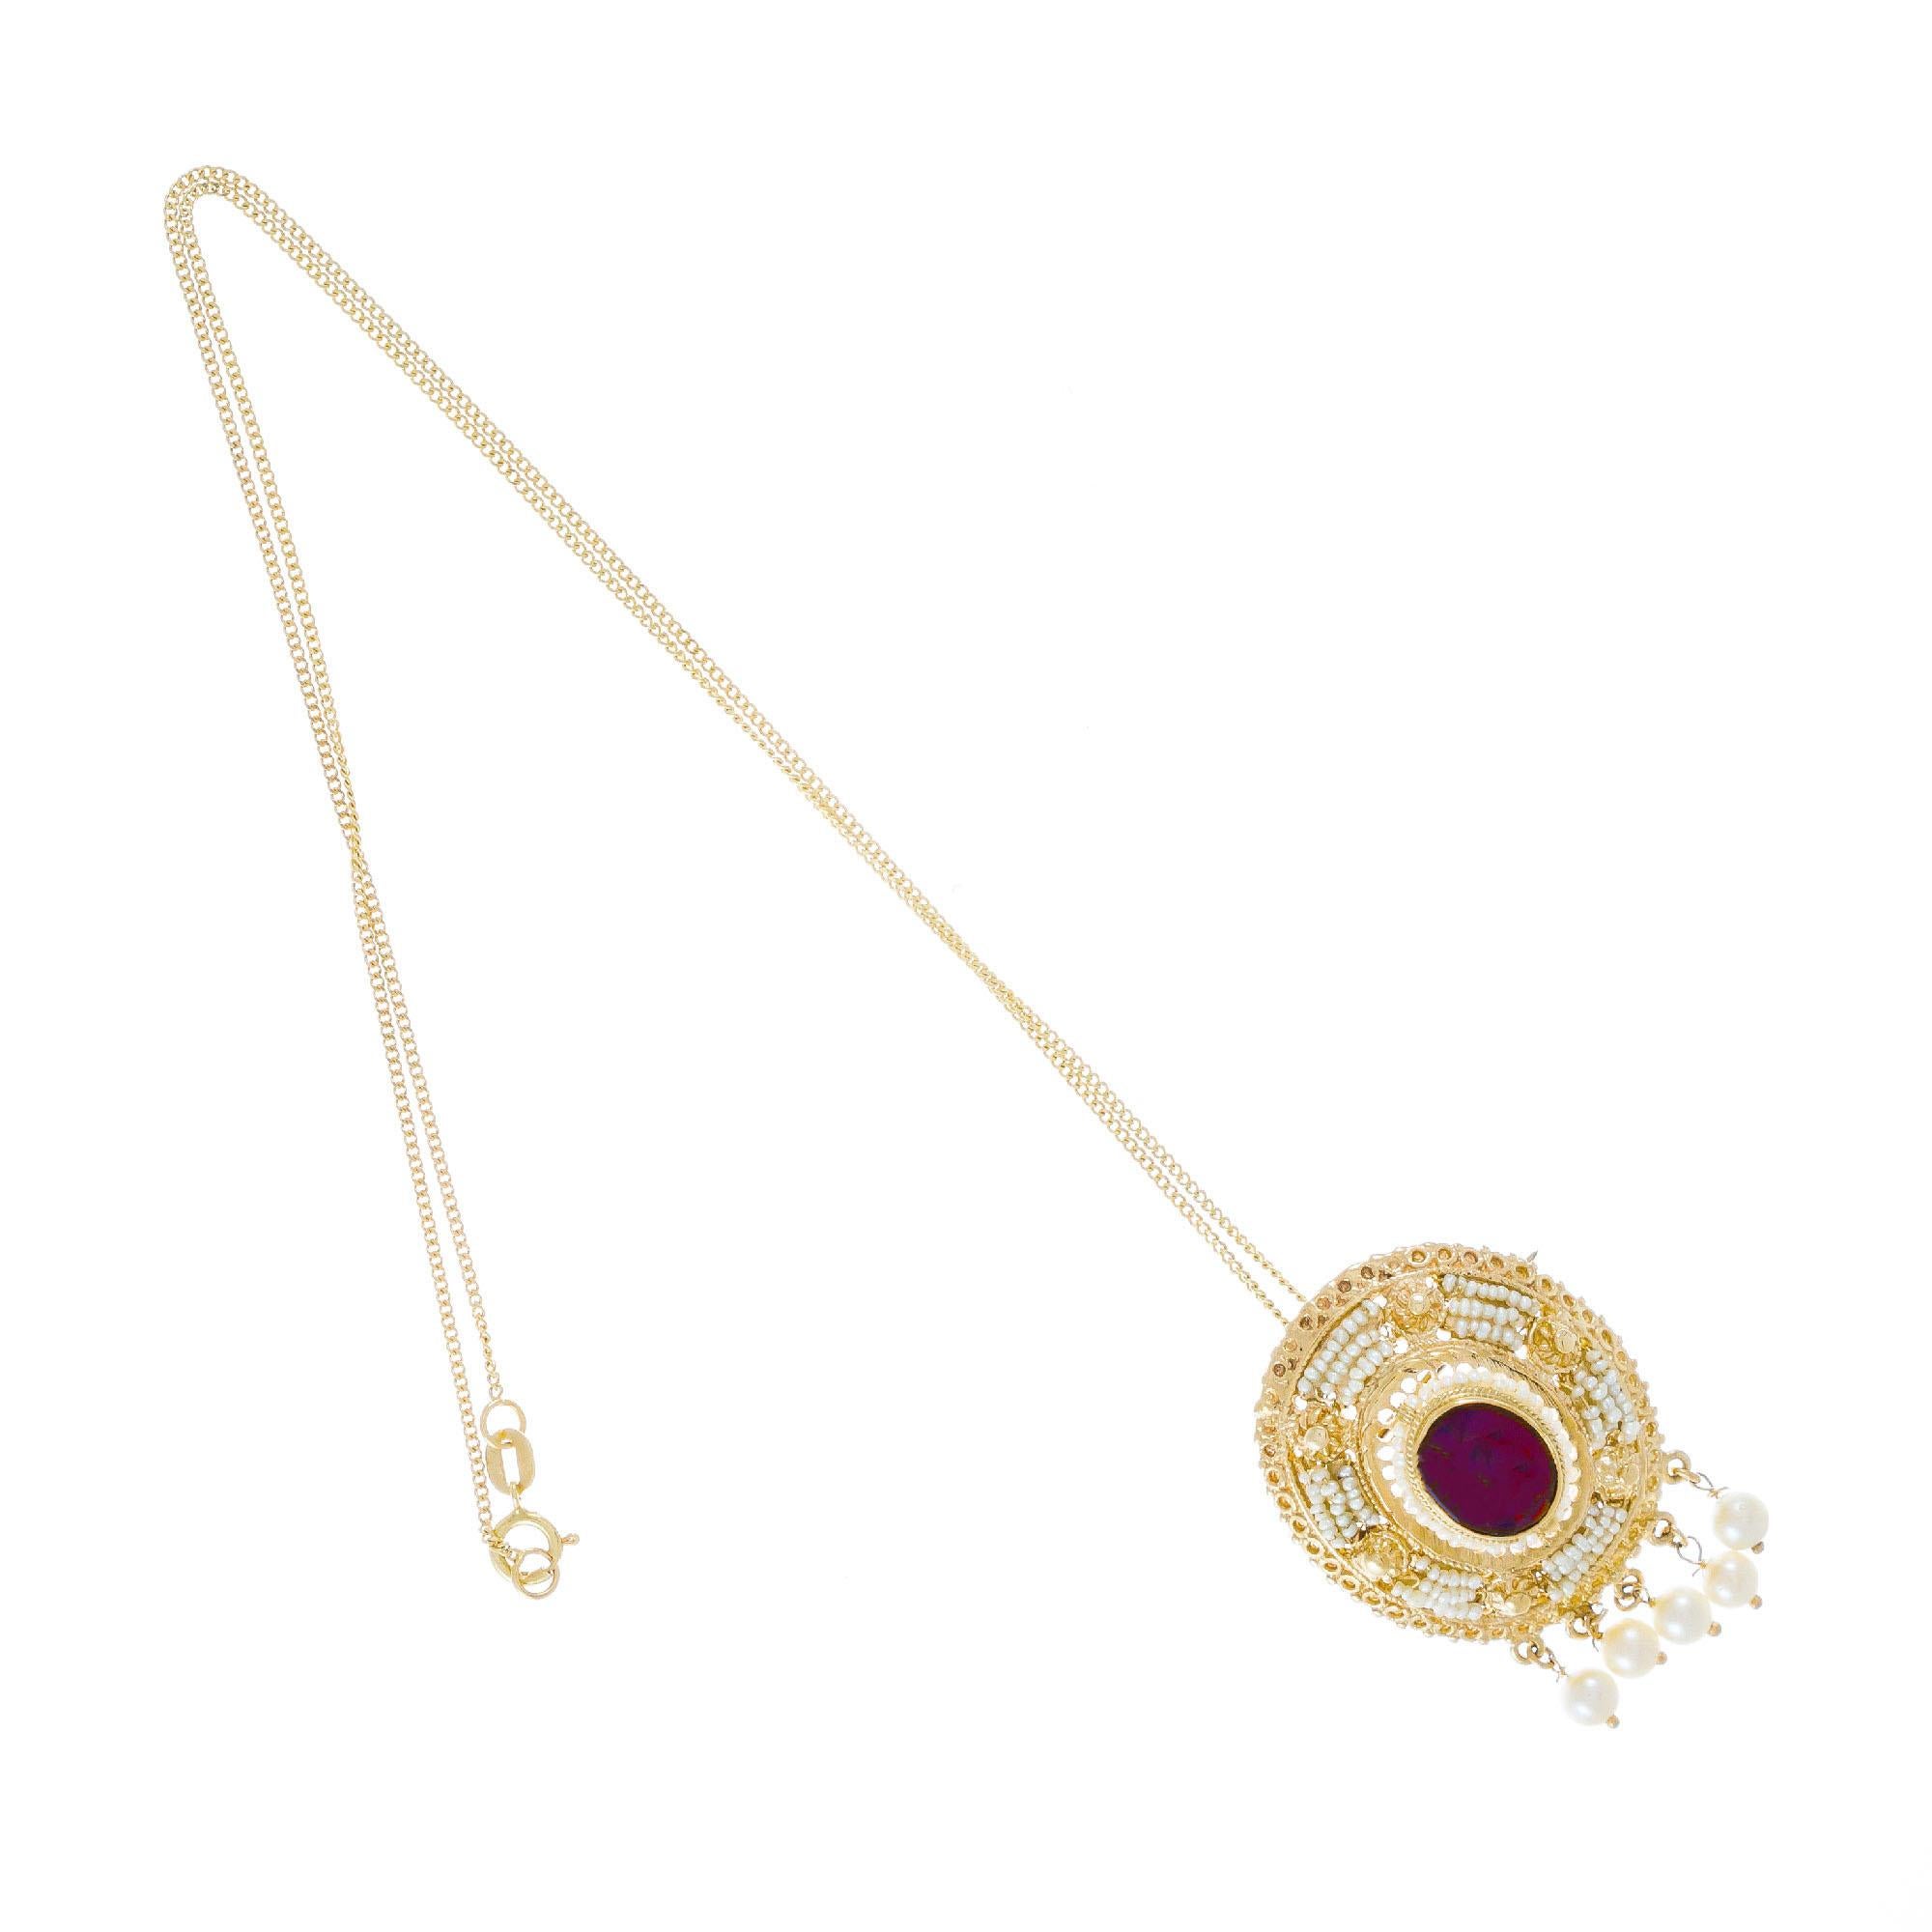 Garnet Seed Pearl Yellow Gold Pendant Brooch Pendant Necklace In Good Condition For Sale In Stamford, CT